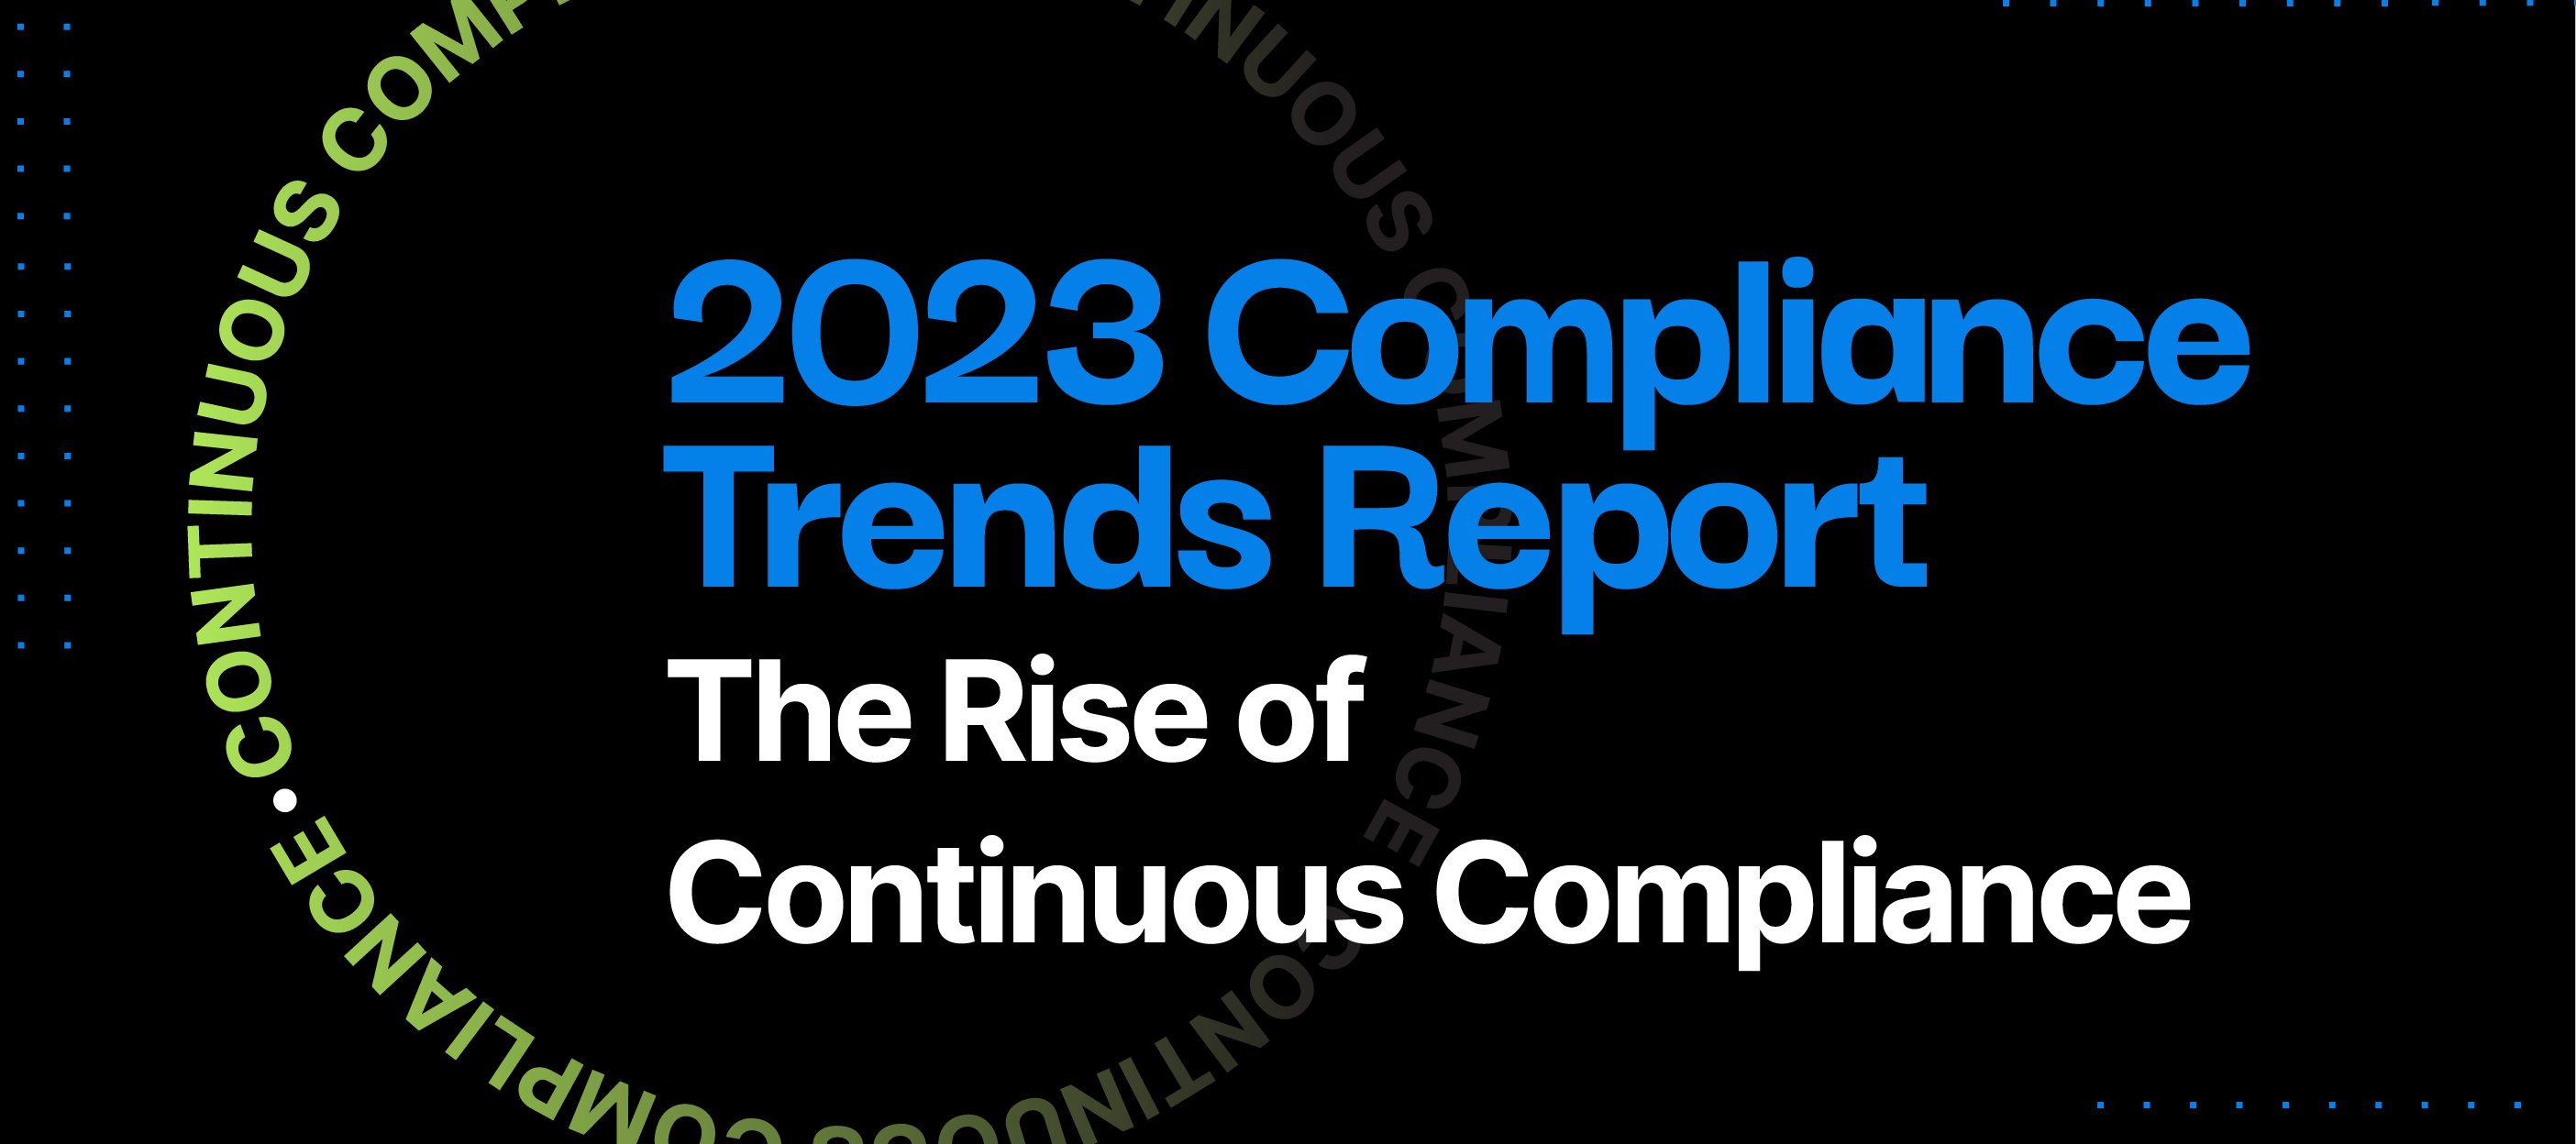 2023 Compliance Trends Report